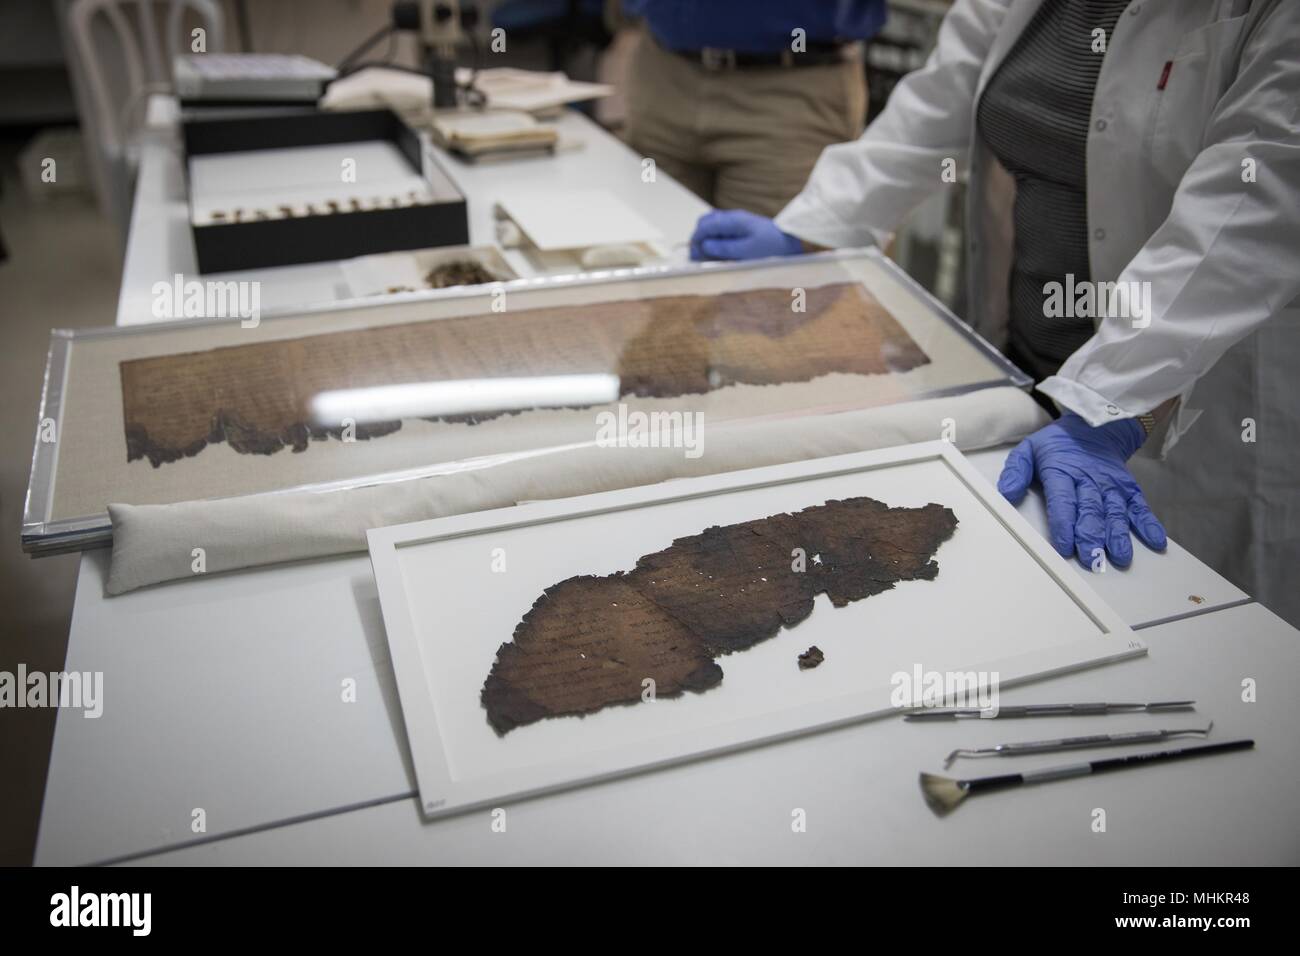 Jerusalem. 2nd May, 2018. Israel Antiquities Authority (IAA) staff members show fragments of a script at the IAA department in the Israel Museum in Jerusalem, on May 2, 2018. Advanced imaging technology originally developed for NASA has revealed previously unnoticed writing on fragments of the Dead Sea Scrolls, the IAA revealed on Tuesday. Moreover, one of the newly discerned and deciphered passages, written in early Hebrew, hints at the existence of a scroll never found and still unknown to researchers. Credit: JINI/Xinhua/Alamy Live News Stock Photo